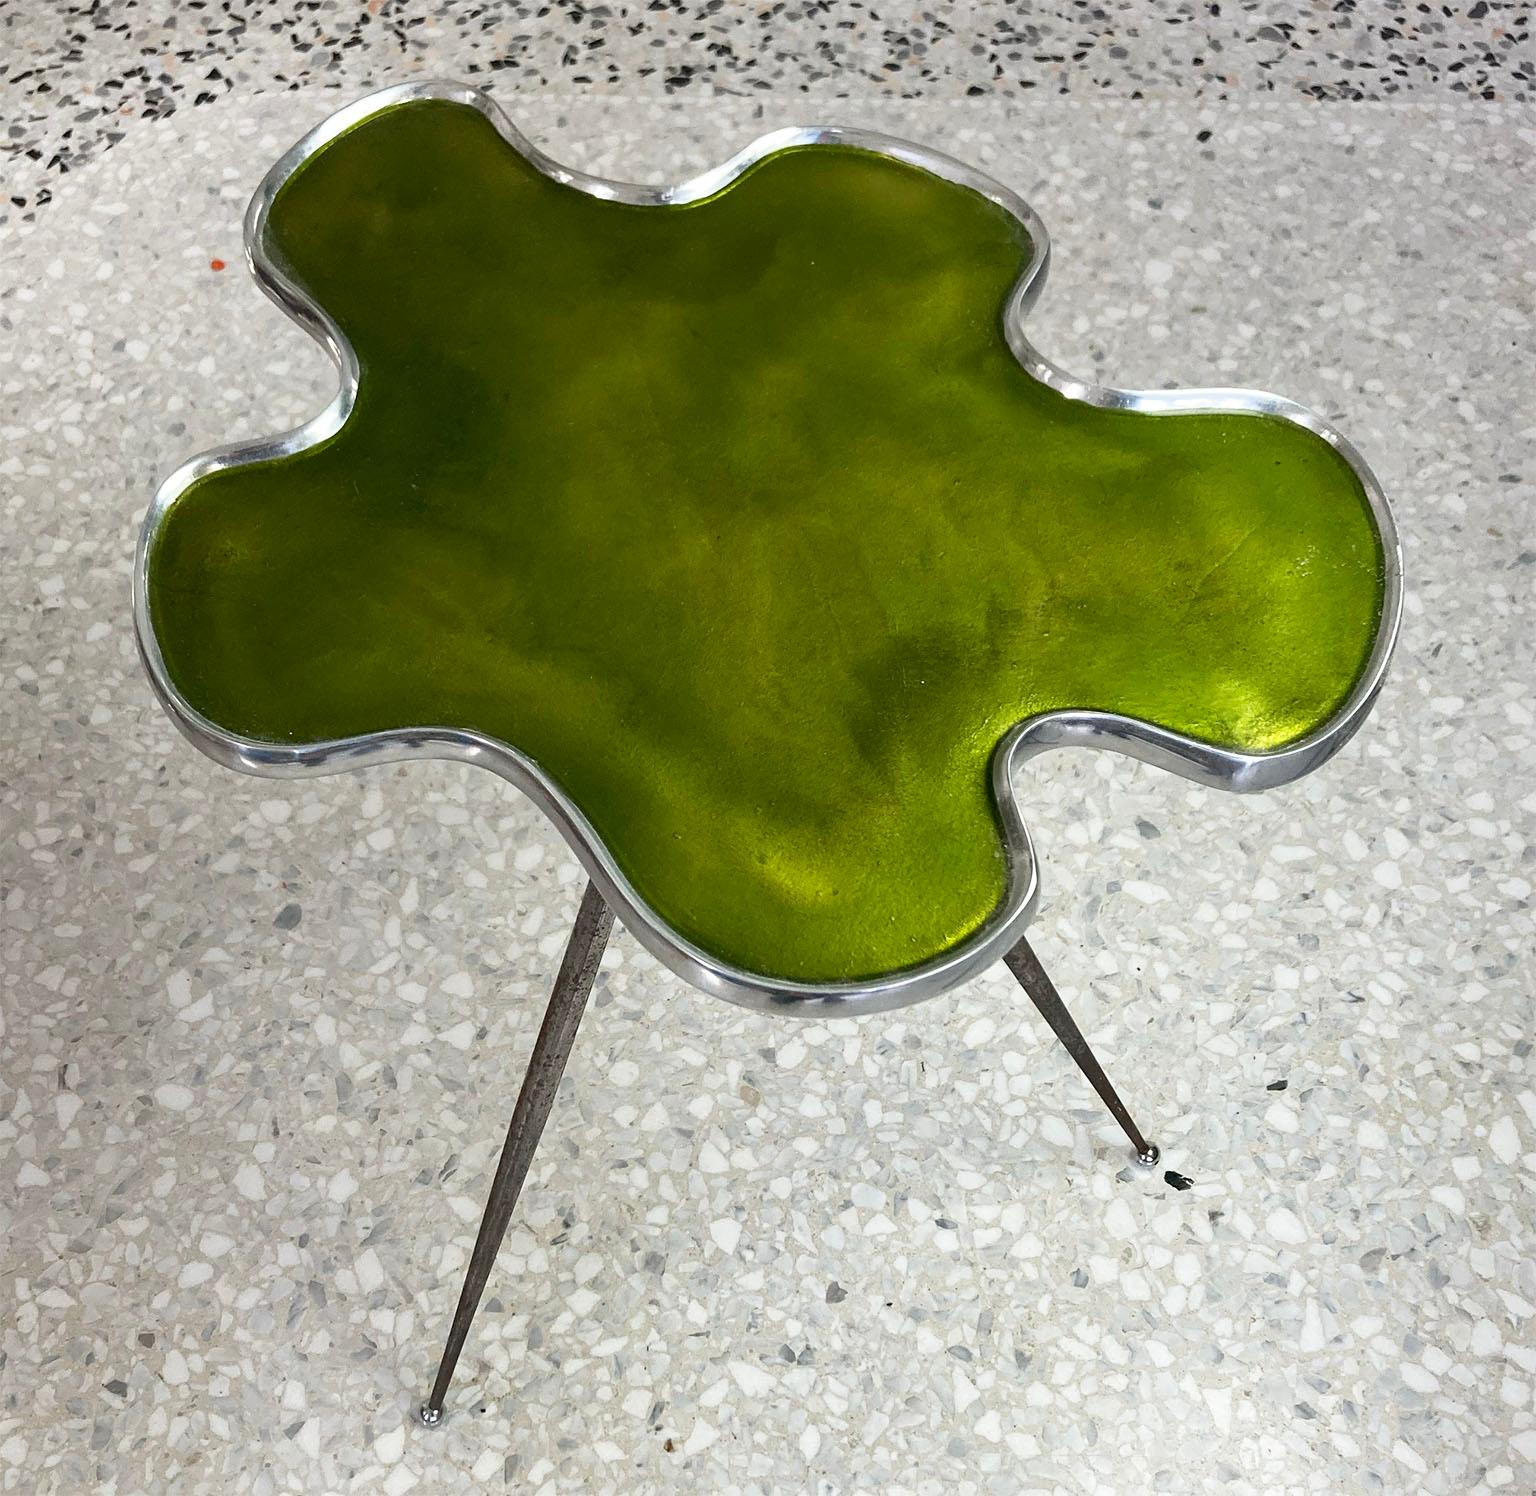 Two organic shaped coffee tables, with top in glossy green enamel,
structure in metal, with different dimensions.

The dimension of the smaller:
Height 60cm
Depth 20cm
Width 28 cm.